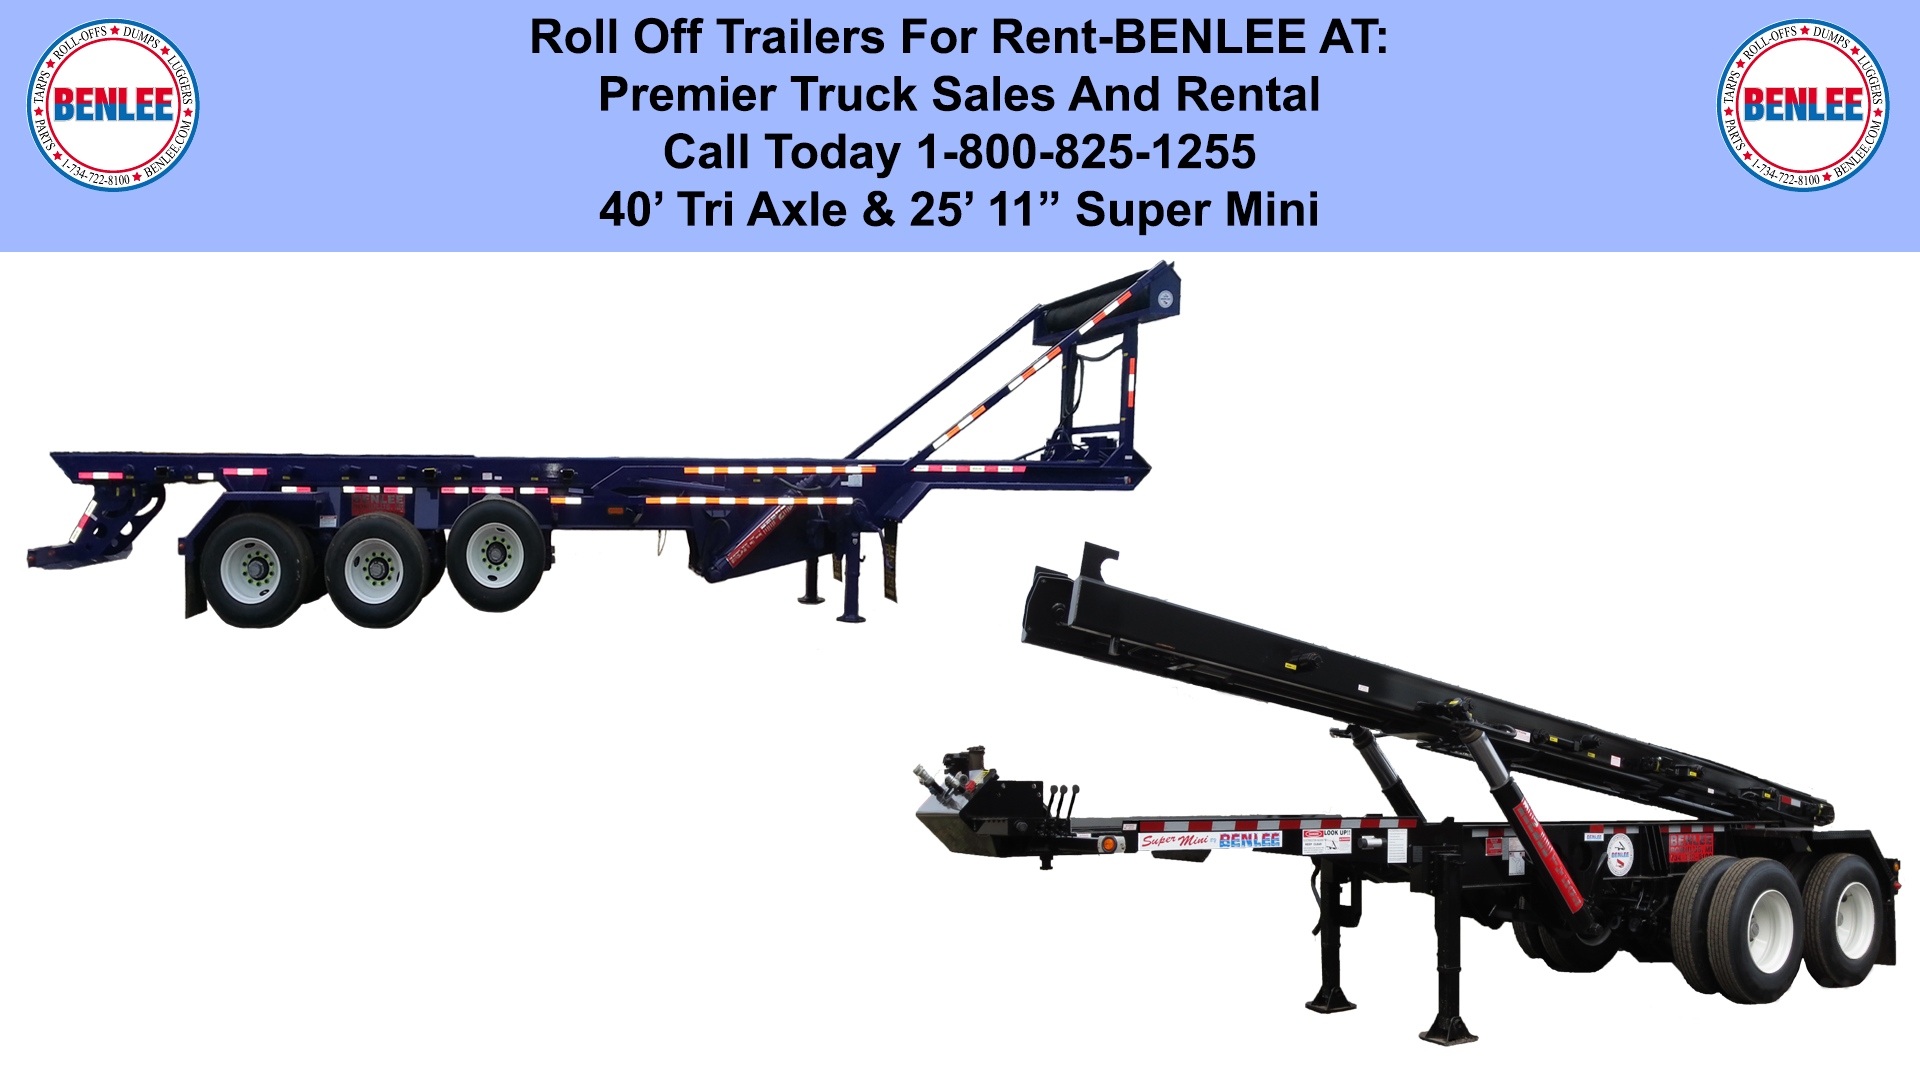 Trailers for Rent